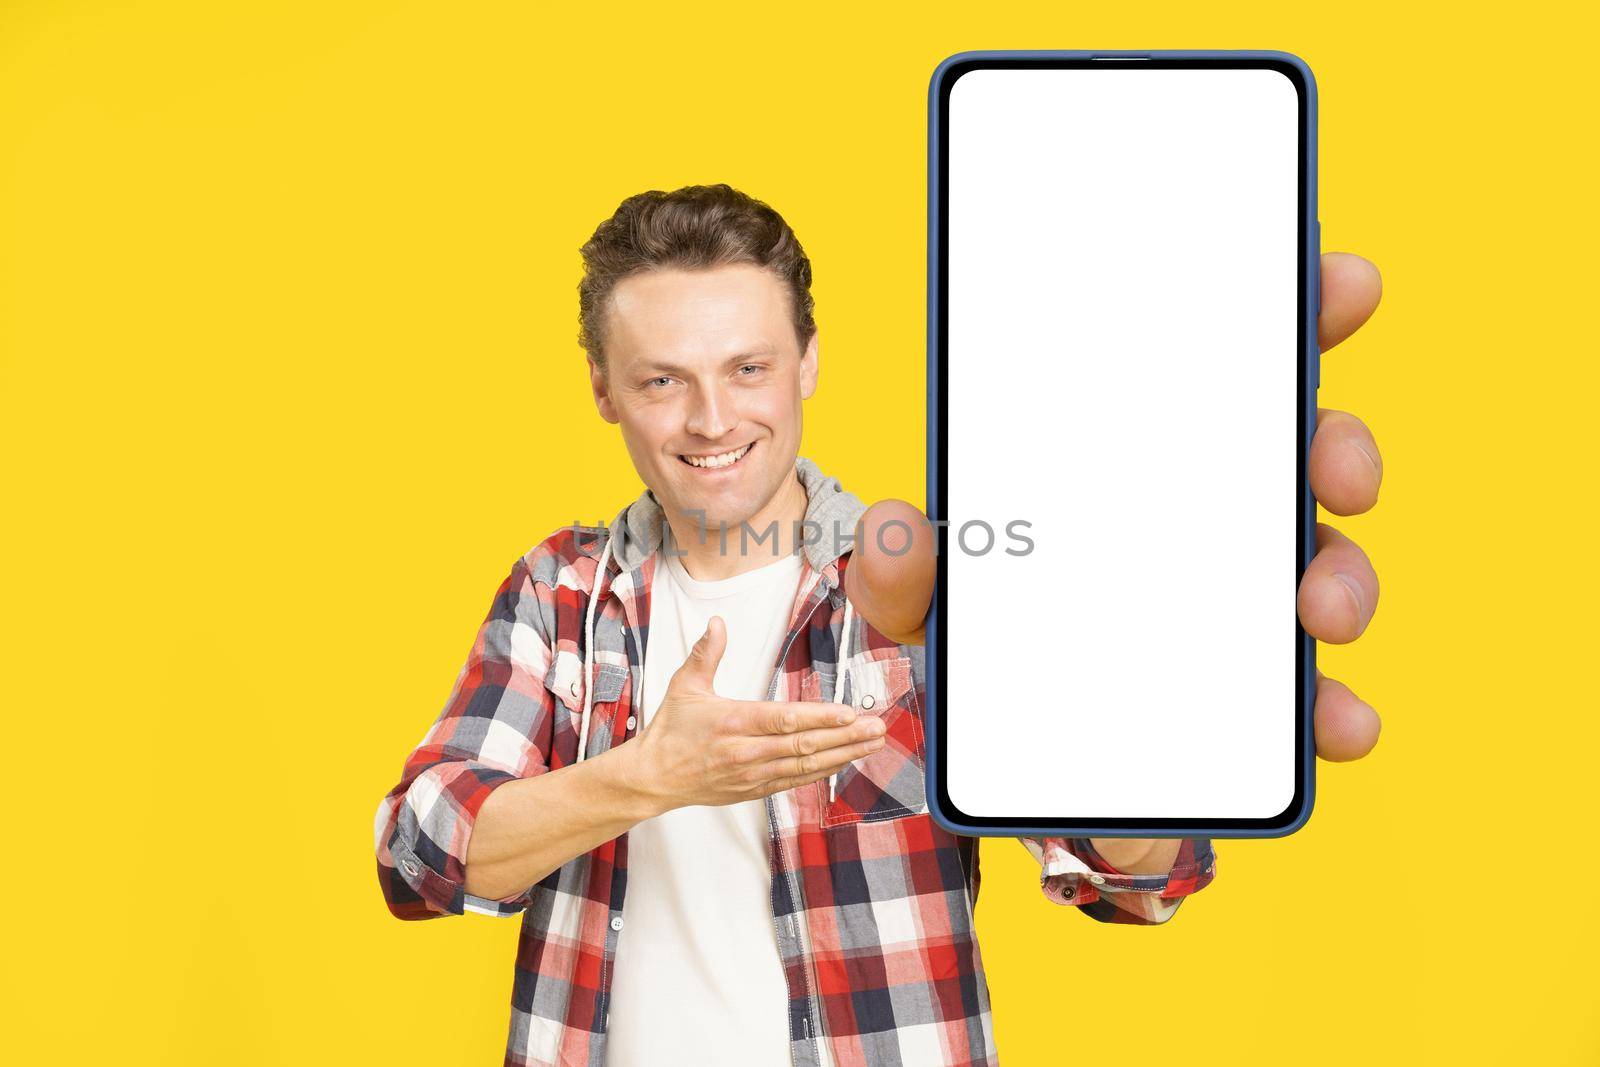 Introducing new app happy holding giant, huge smartphone with white screen blond man, wearing red plaid shirt. Man with phone display mock up isolated on yellow background. Mobile app advertisement by LipikStockMedia